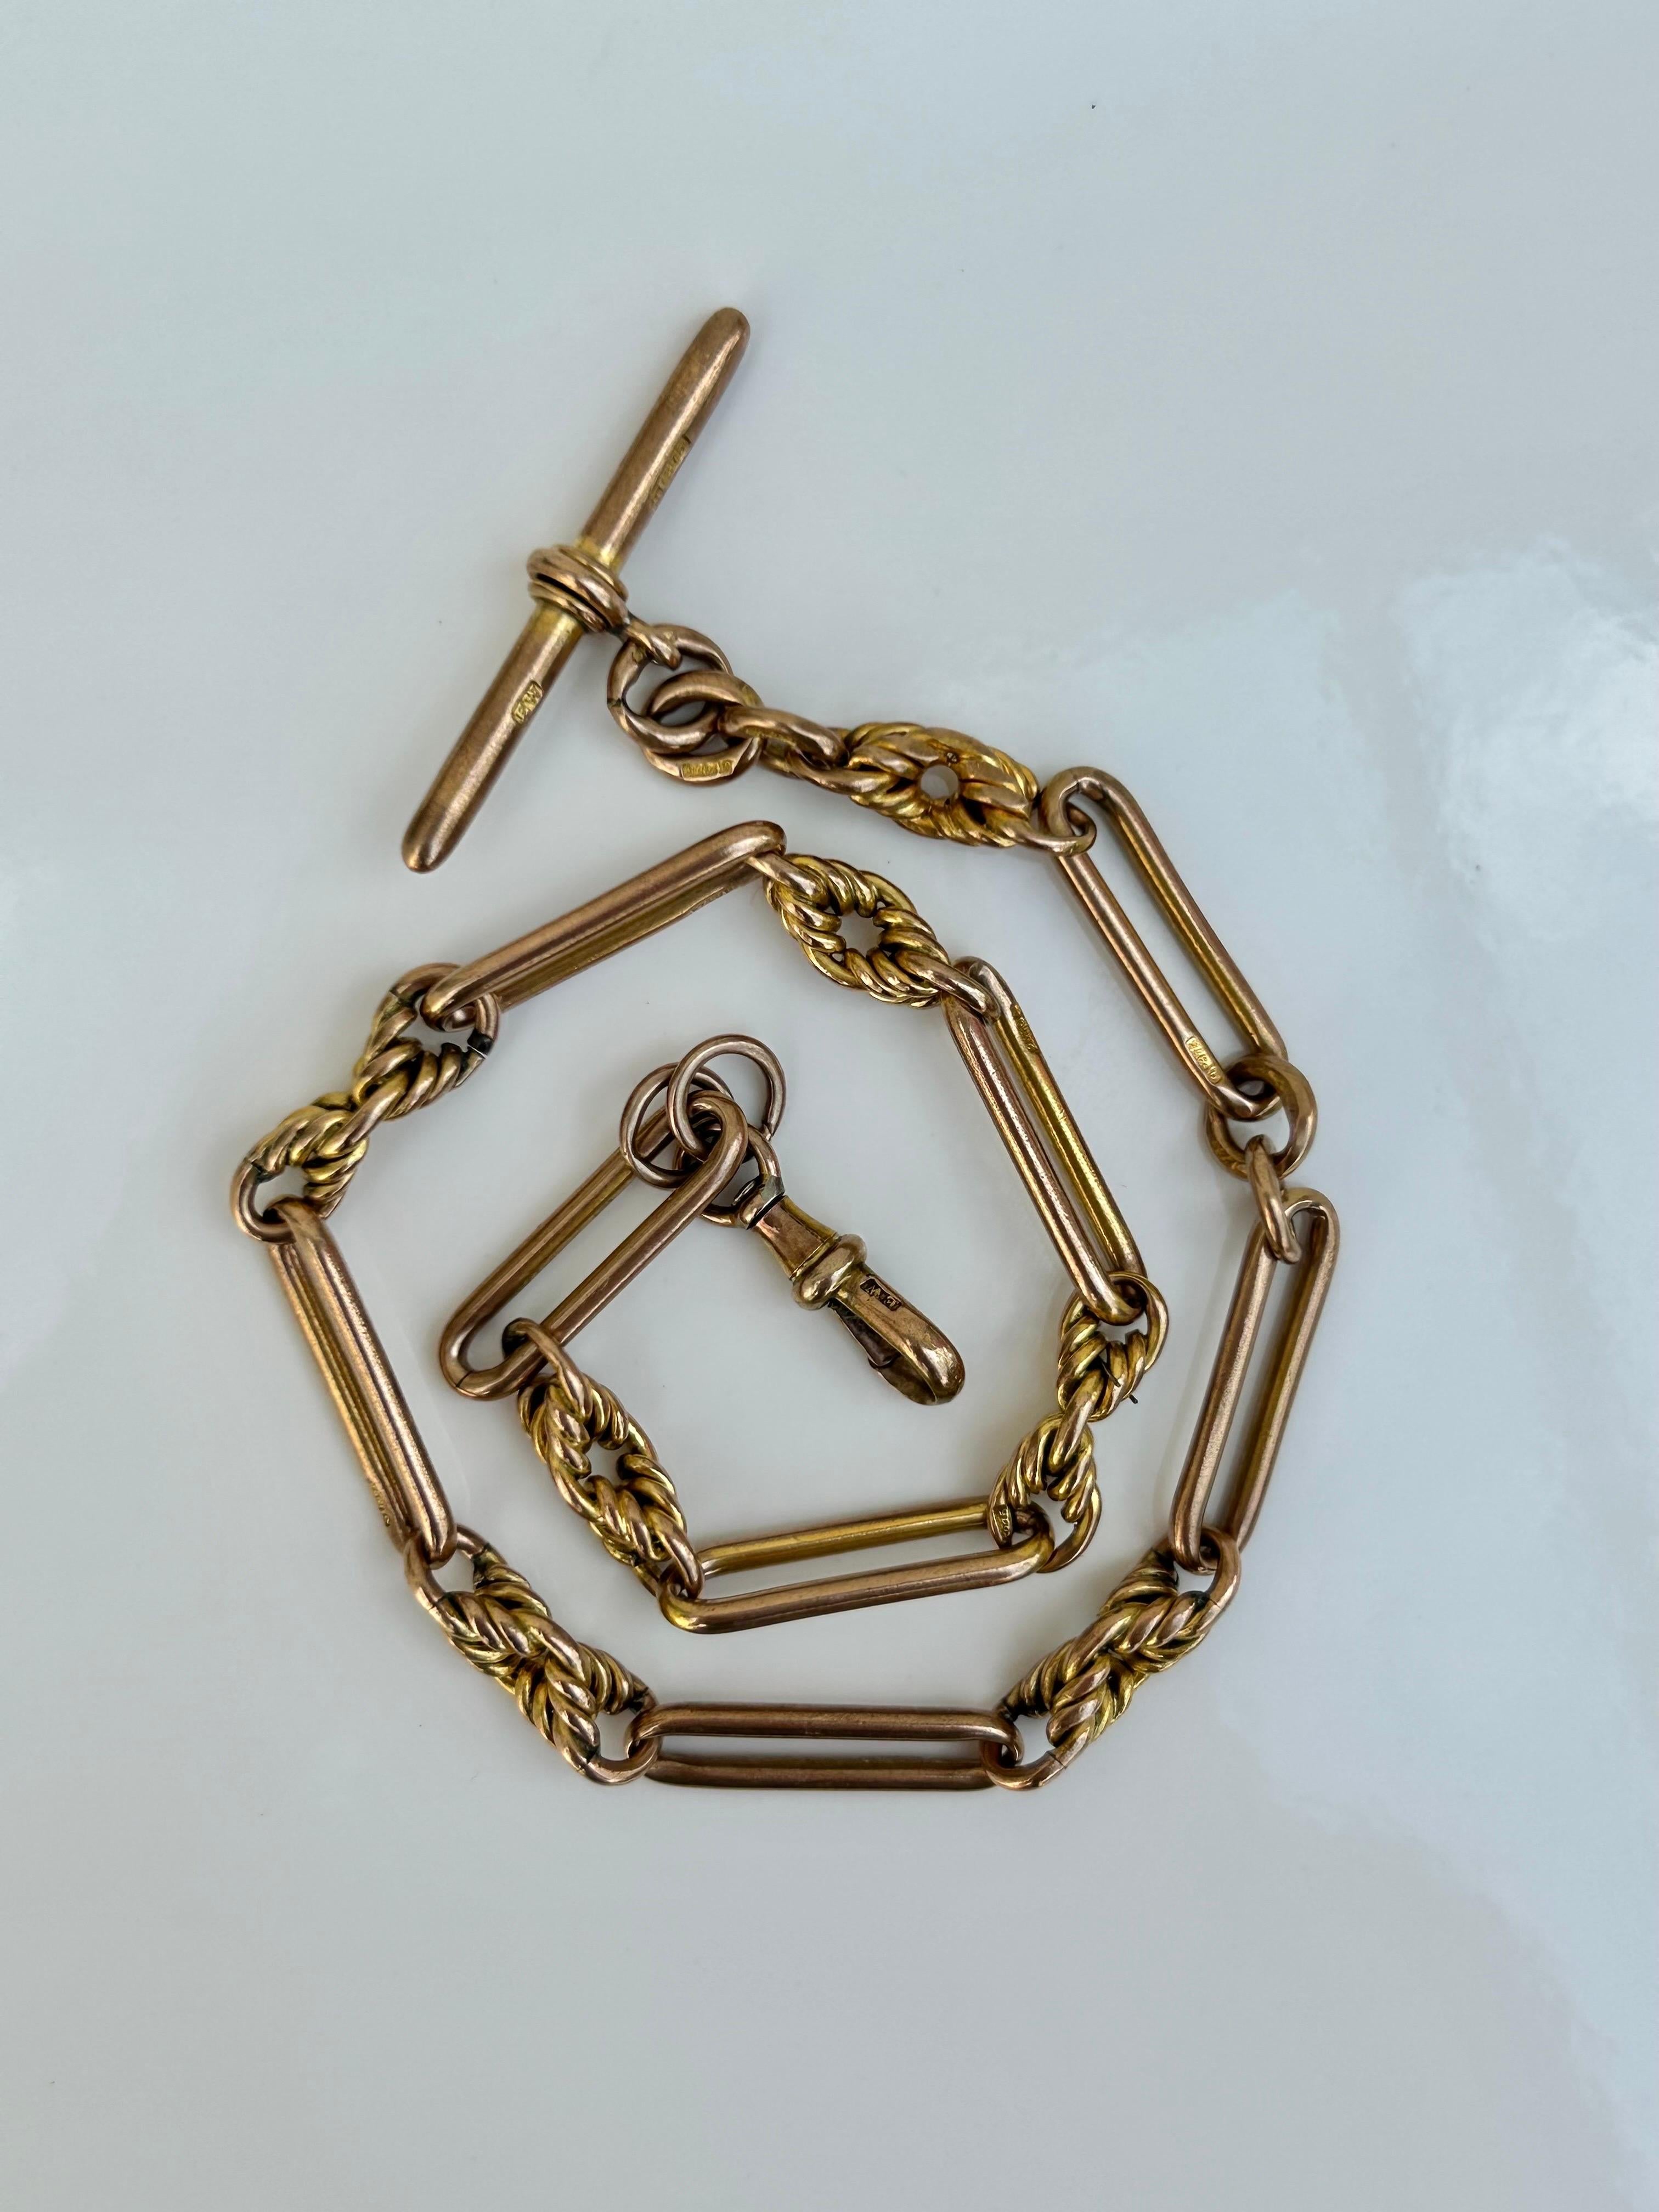 Antique 9ct Gold Albert Trombone and Twist Design Necklace 

Gorgeous gold twist links!! Shorter in length 

The item comes without the box in the photo but will be presented in a Howard’s Antique gift book

Measurements: weight 39.48g, length 36cm,